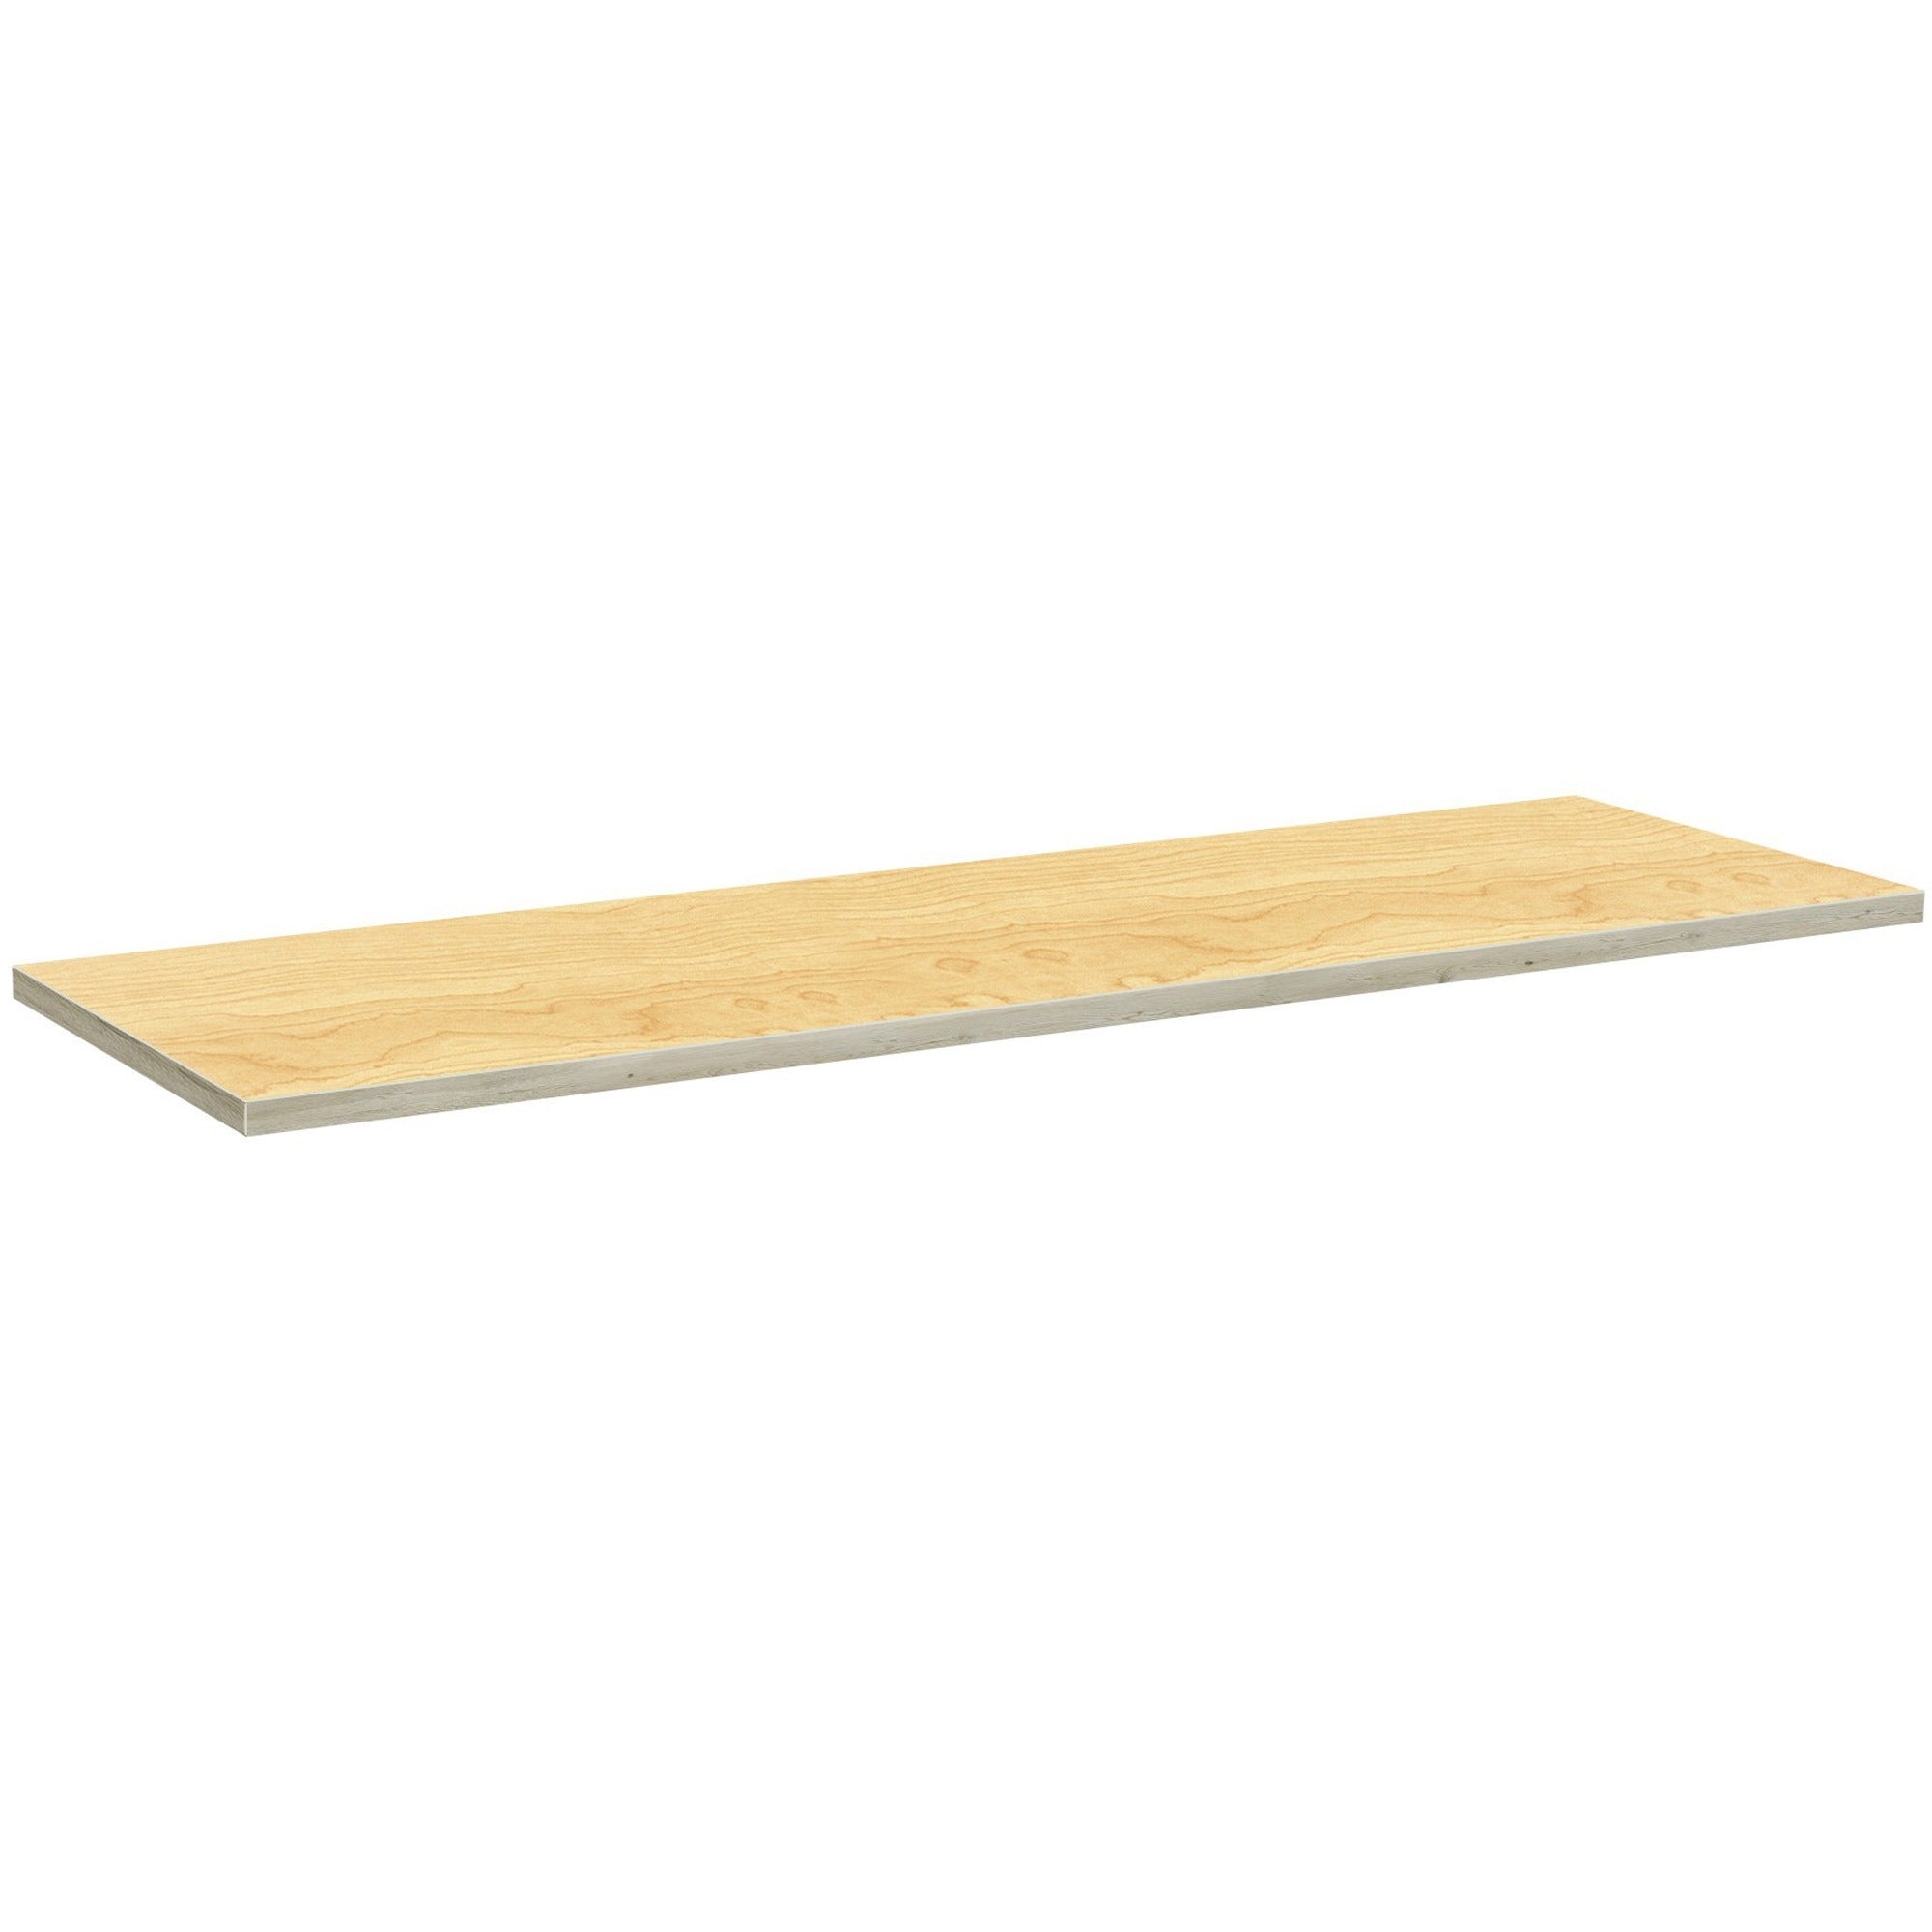 special-t-low-pressure-laminate-tabletop-for-table-topcrema-maple-rectangle-top-24-table-top-length-x-72-table-top-width-low-pressure-laminate-lpl-top-material-1-each_sctsp2472cm - 1